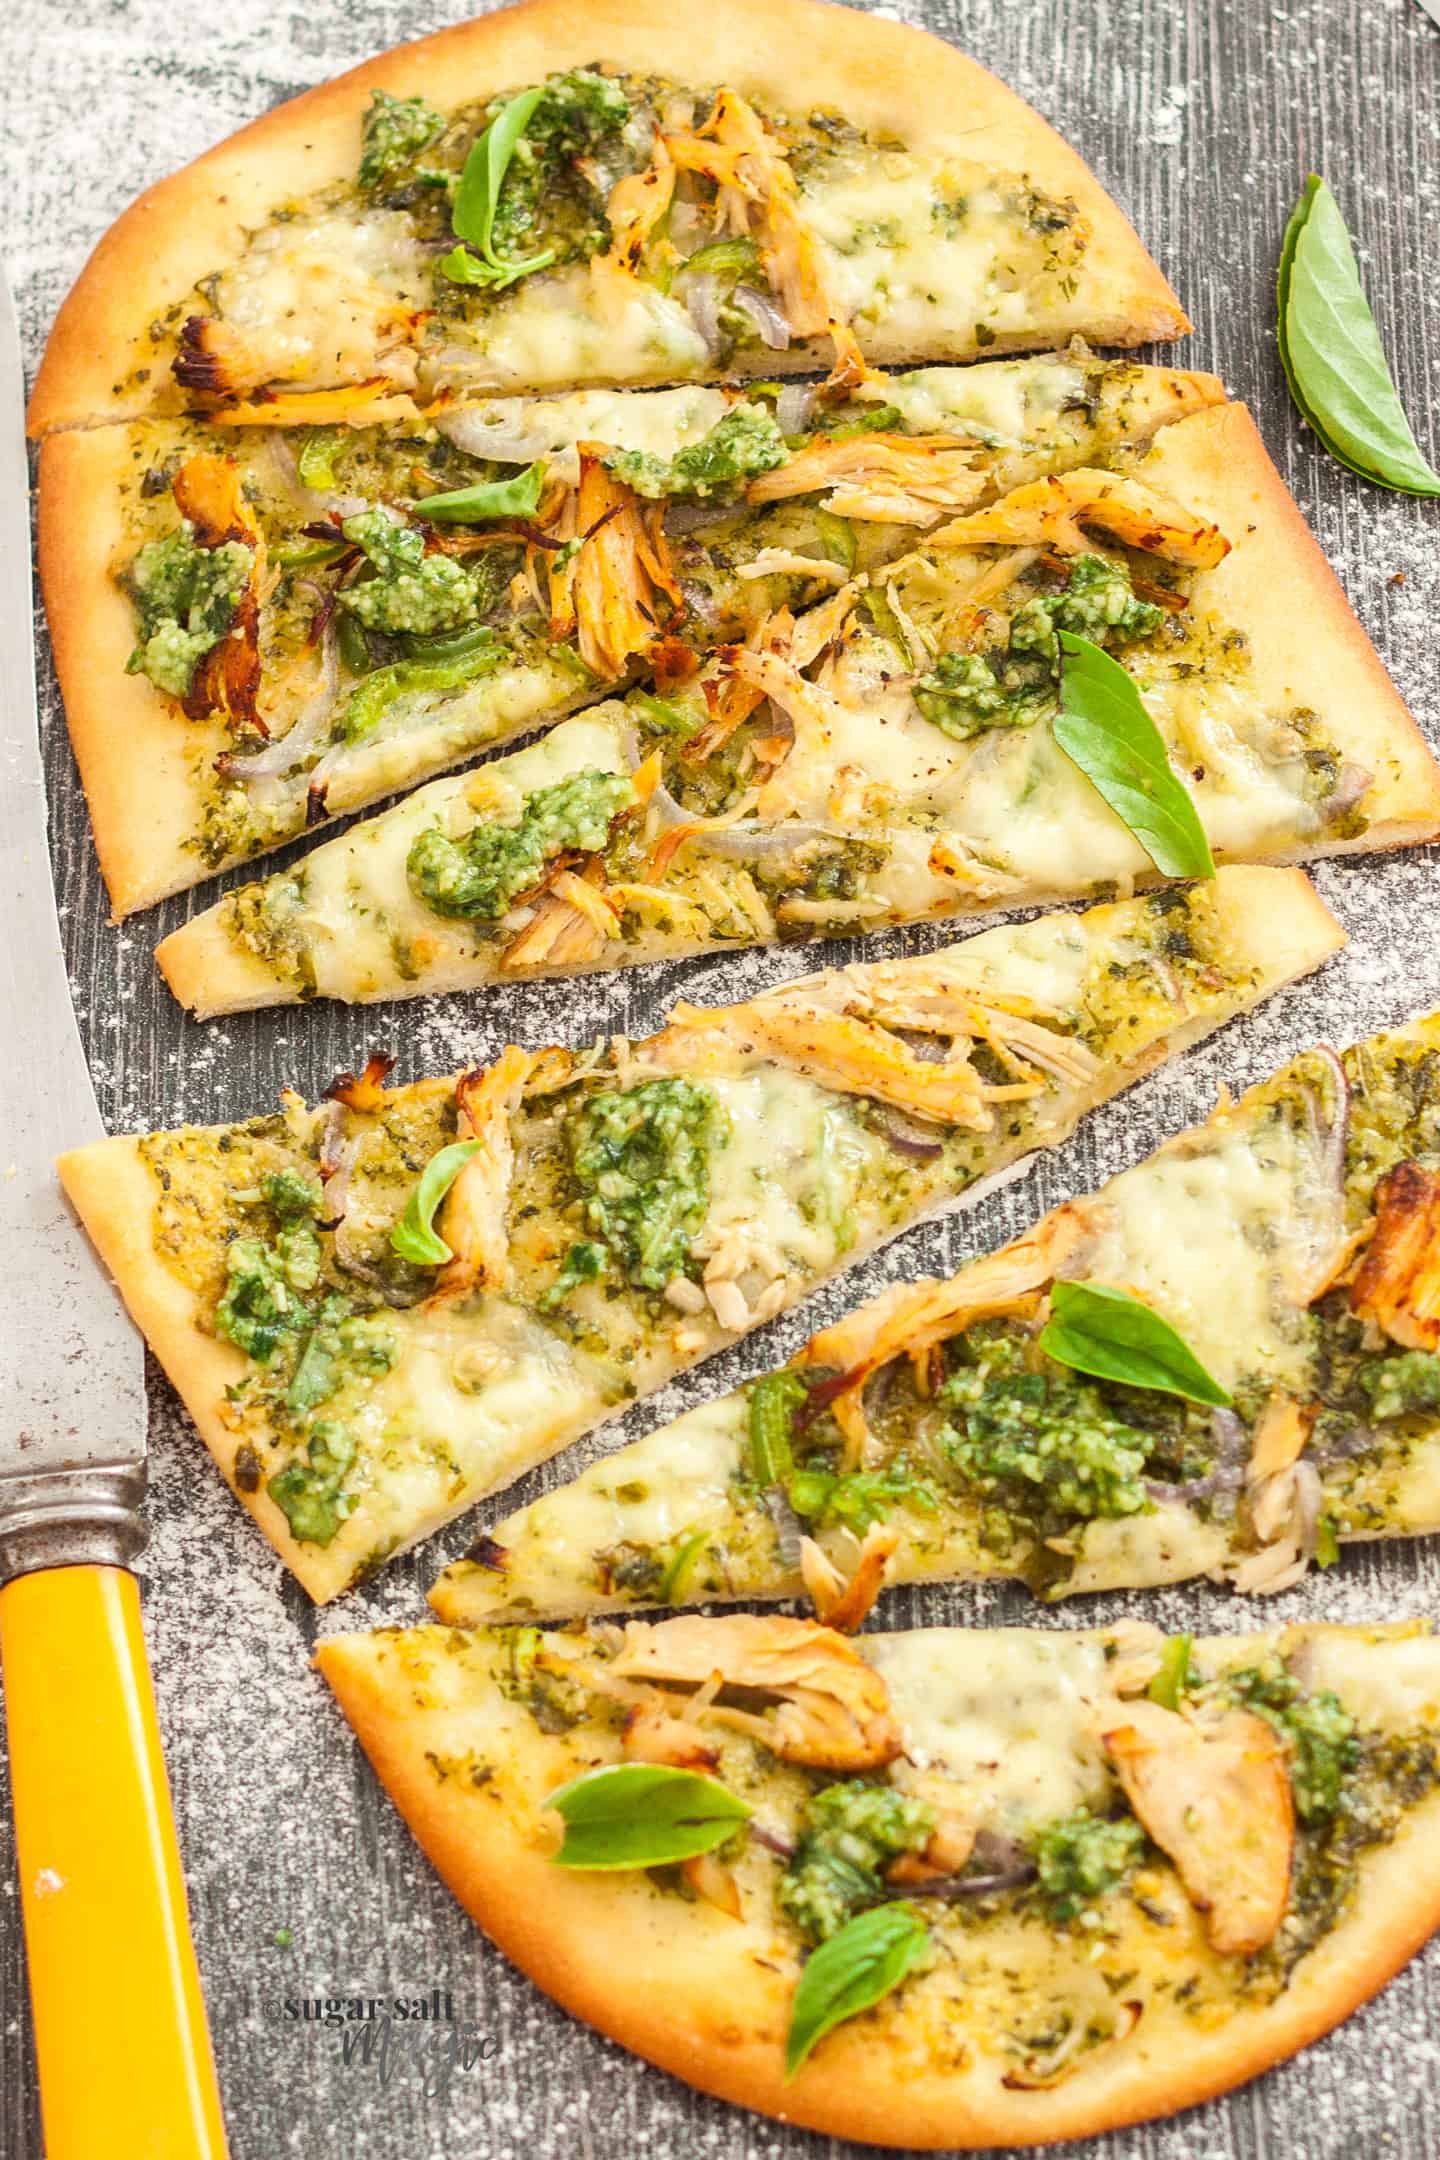 Flatbread topped with pesto and turkey, cut into slices, on a wood surface.